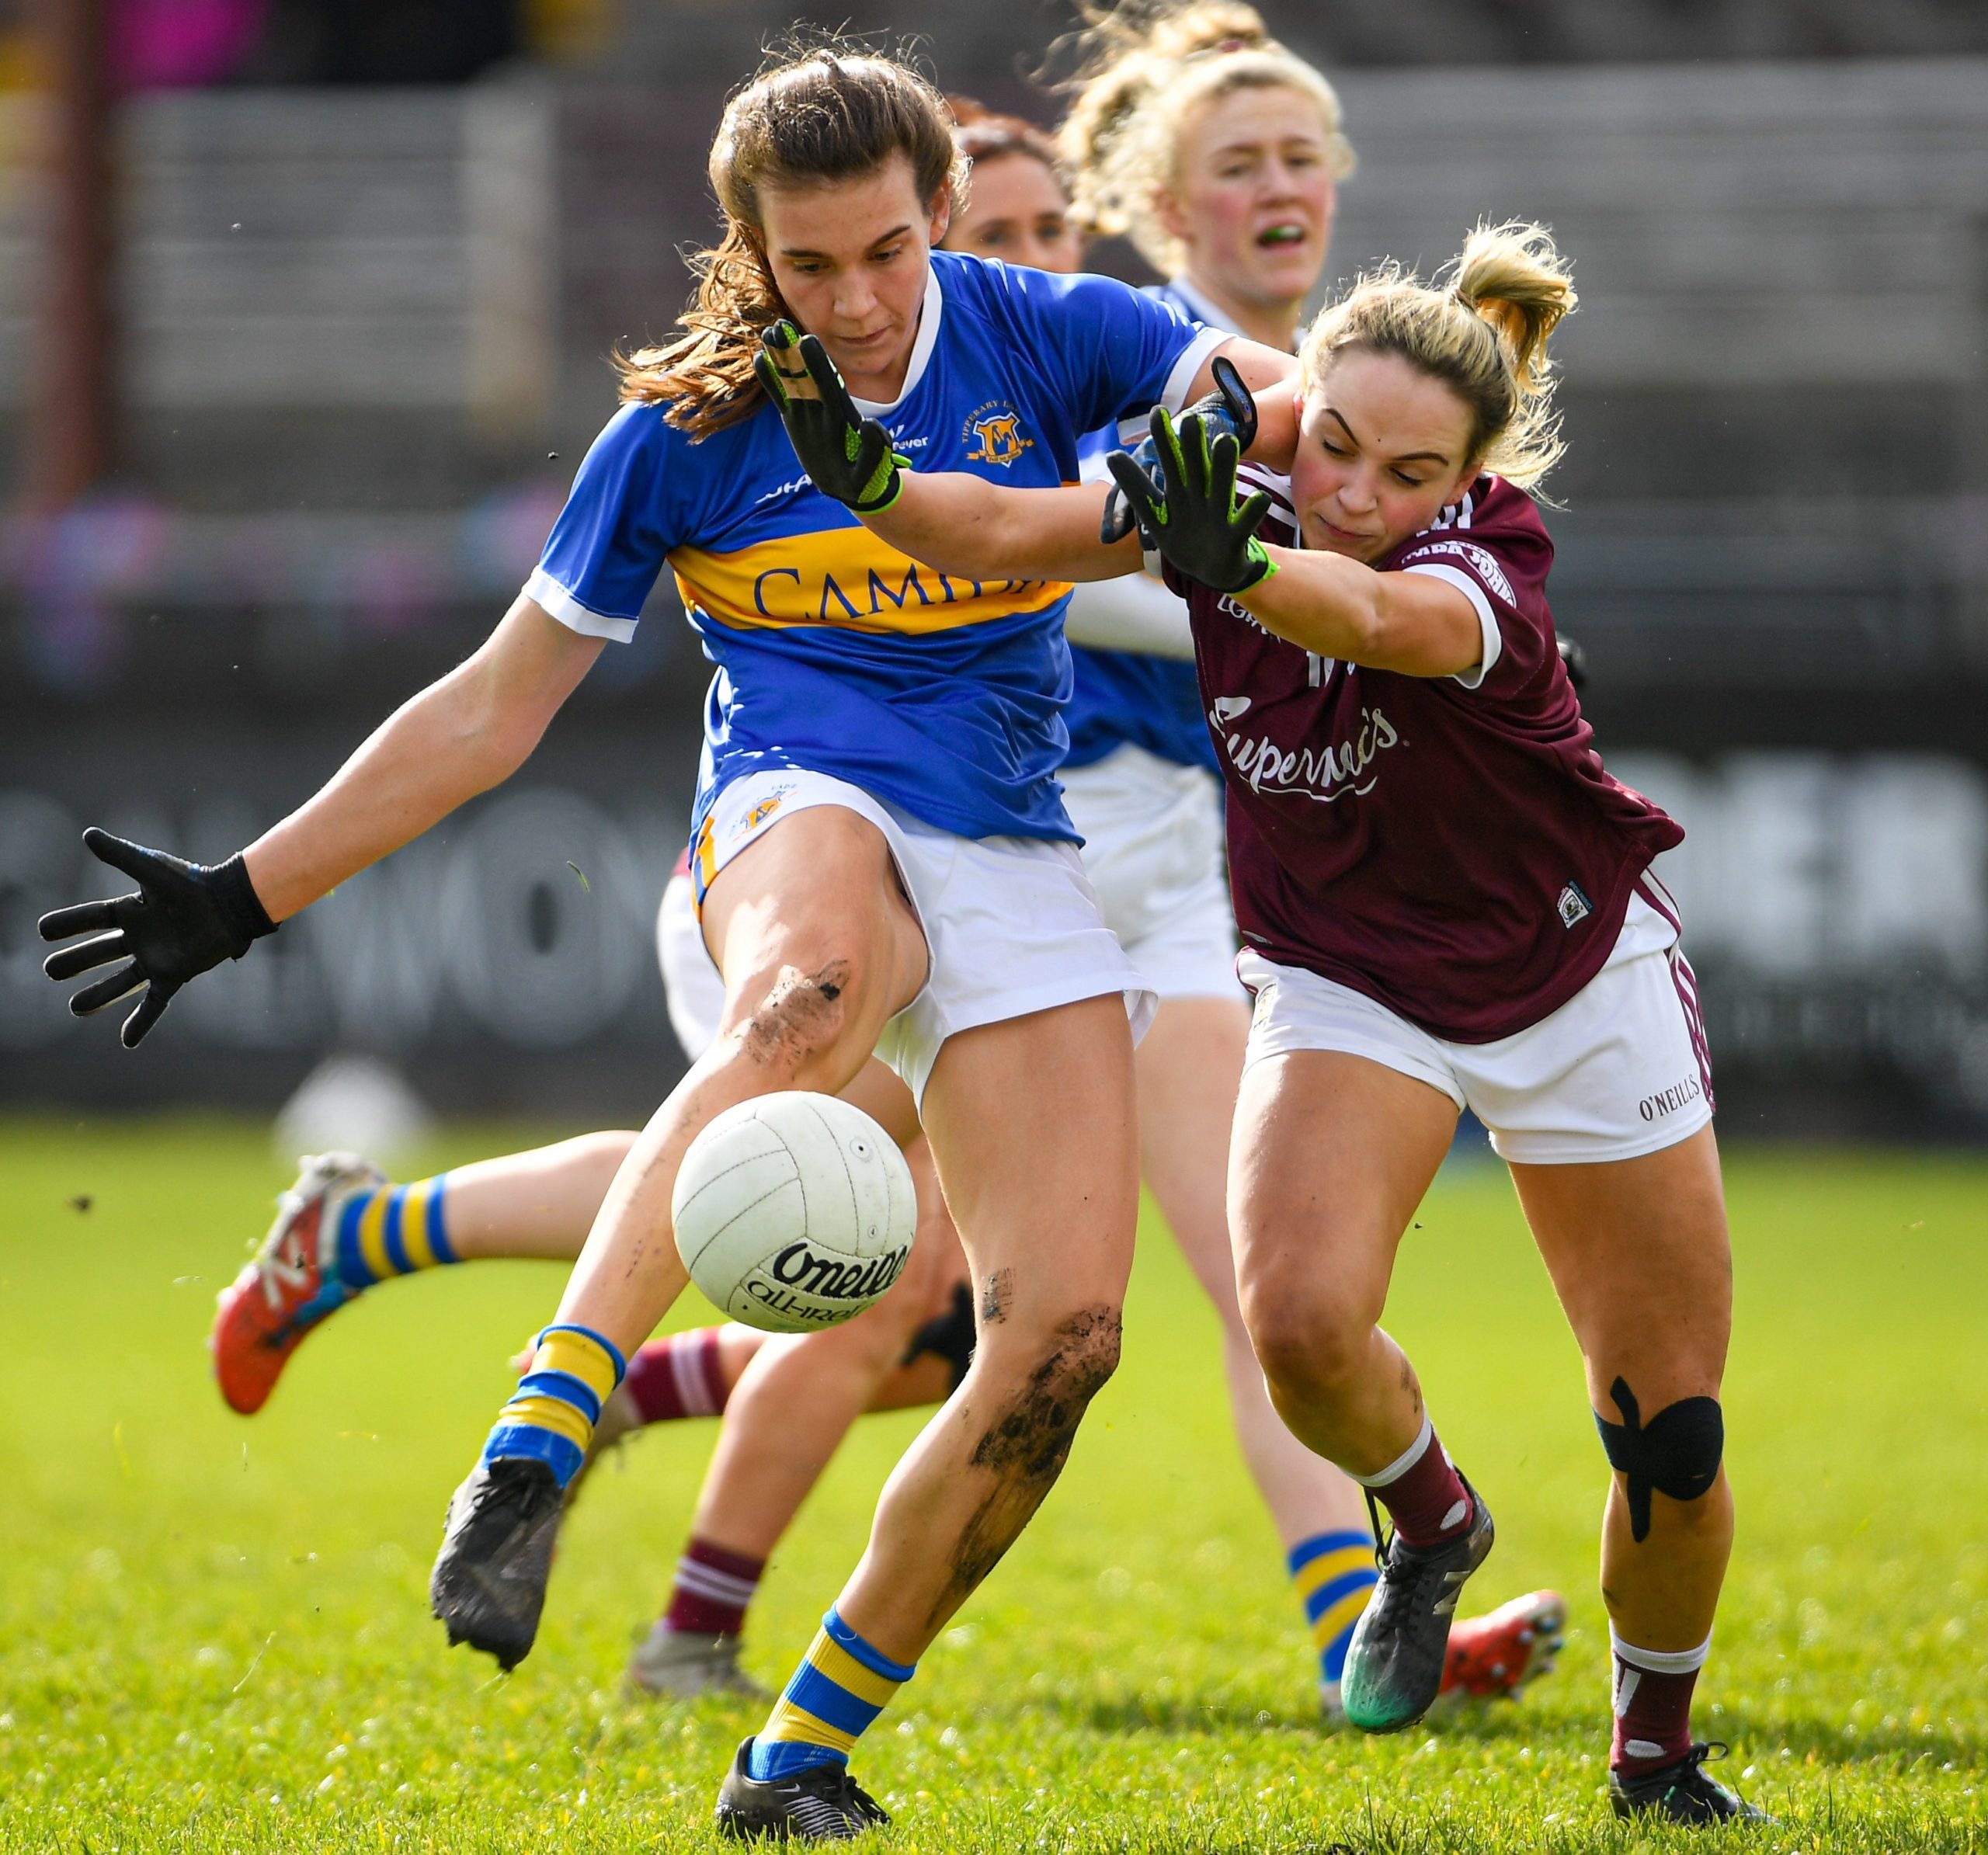 Galway hoping for return of captain Louise Ward for top-of-the-table clash with Cork